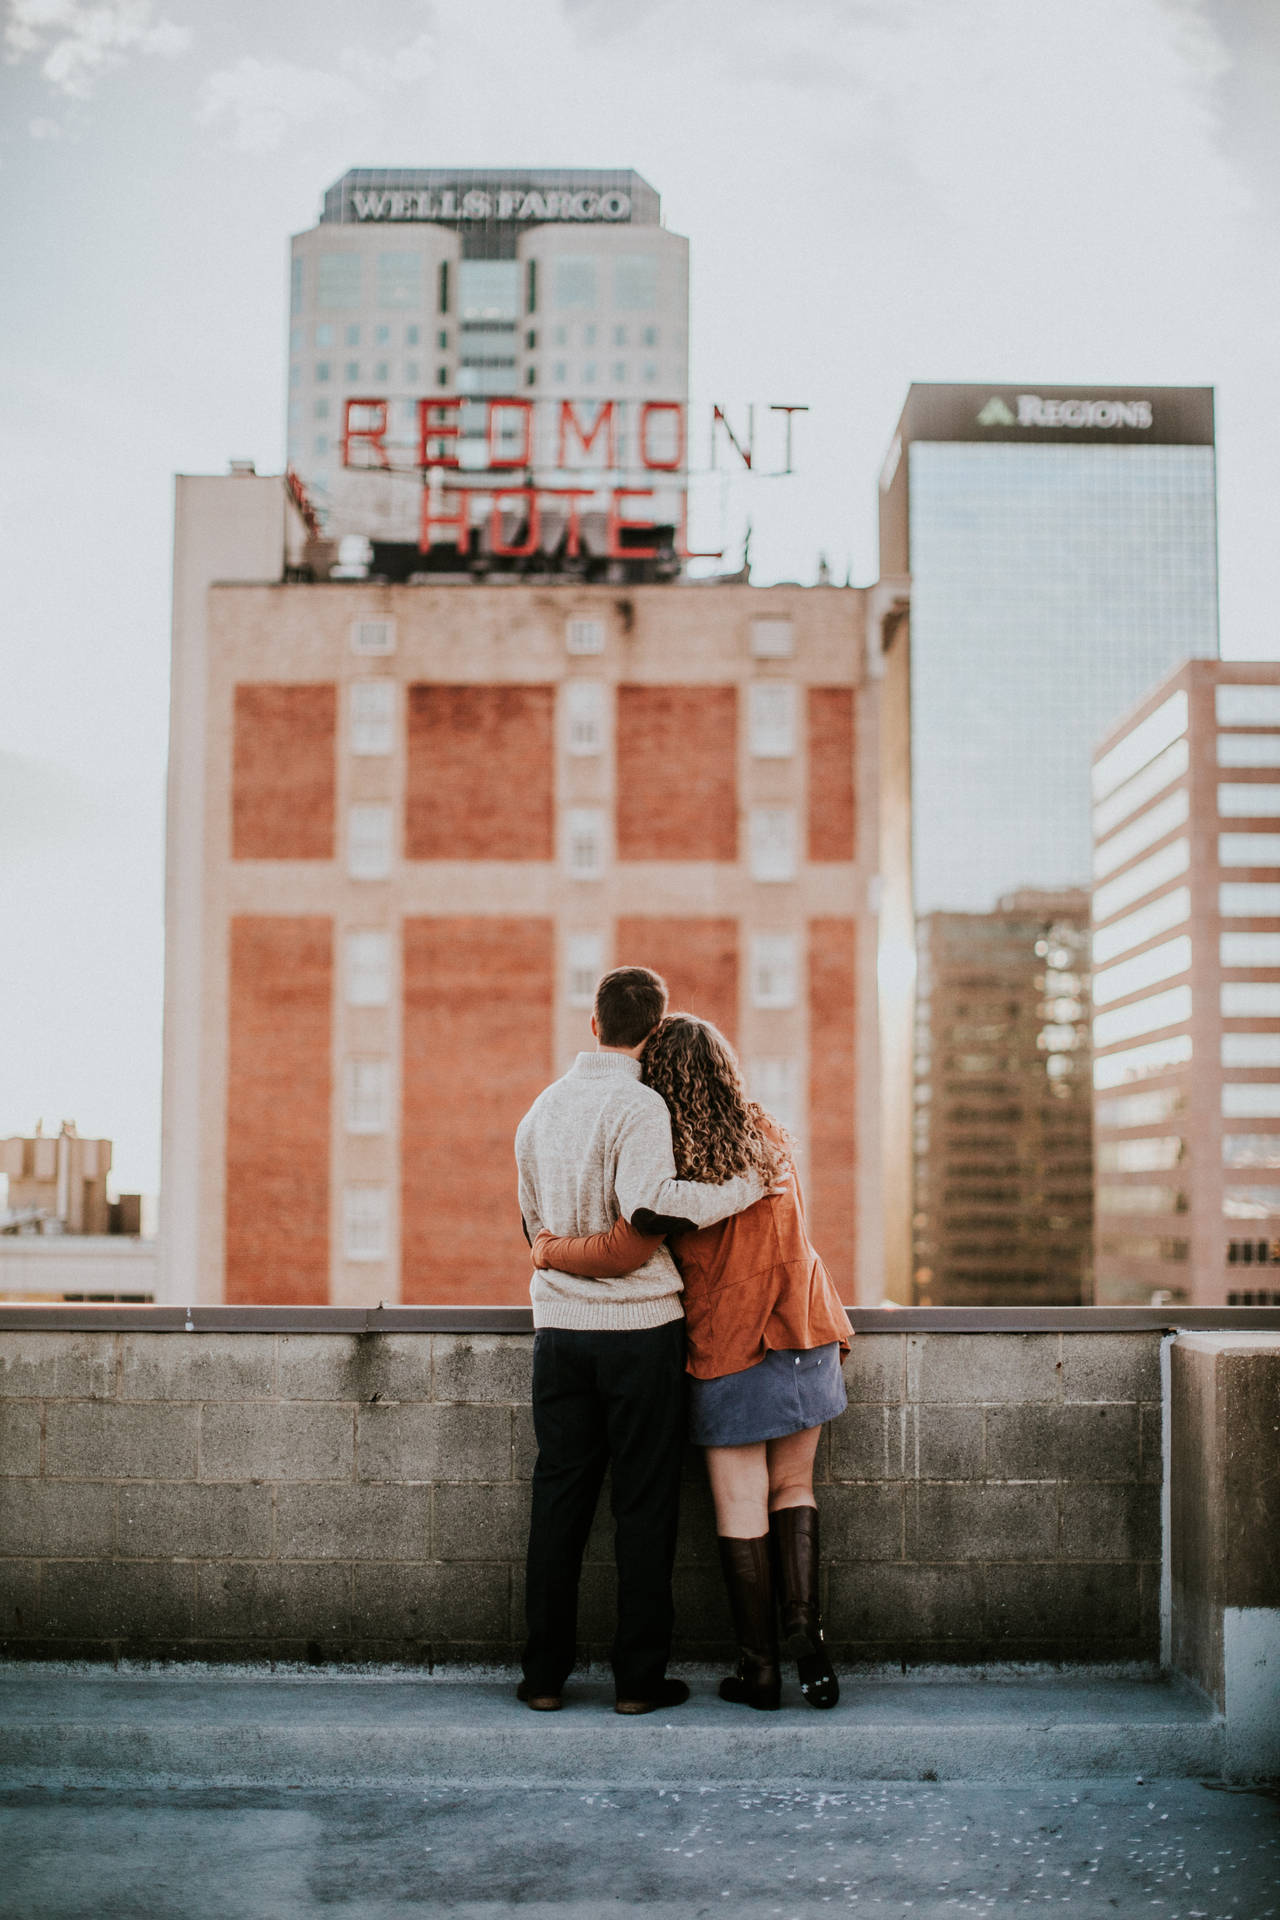 Cute Valentine's Day Rooftop View Wallpaper